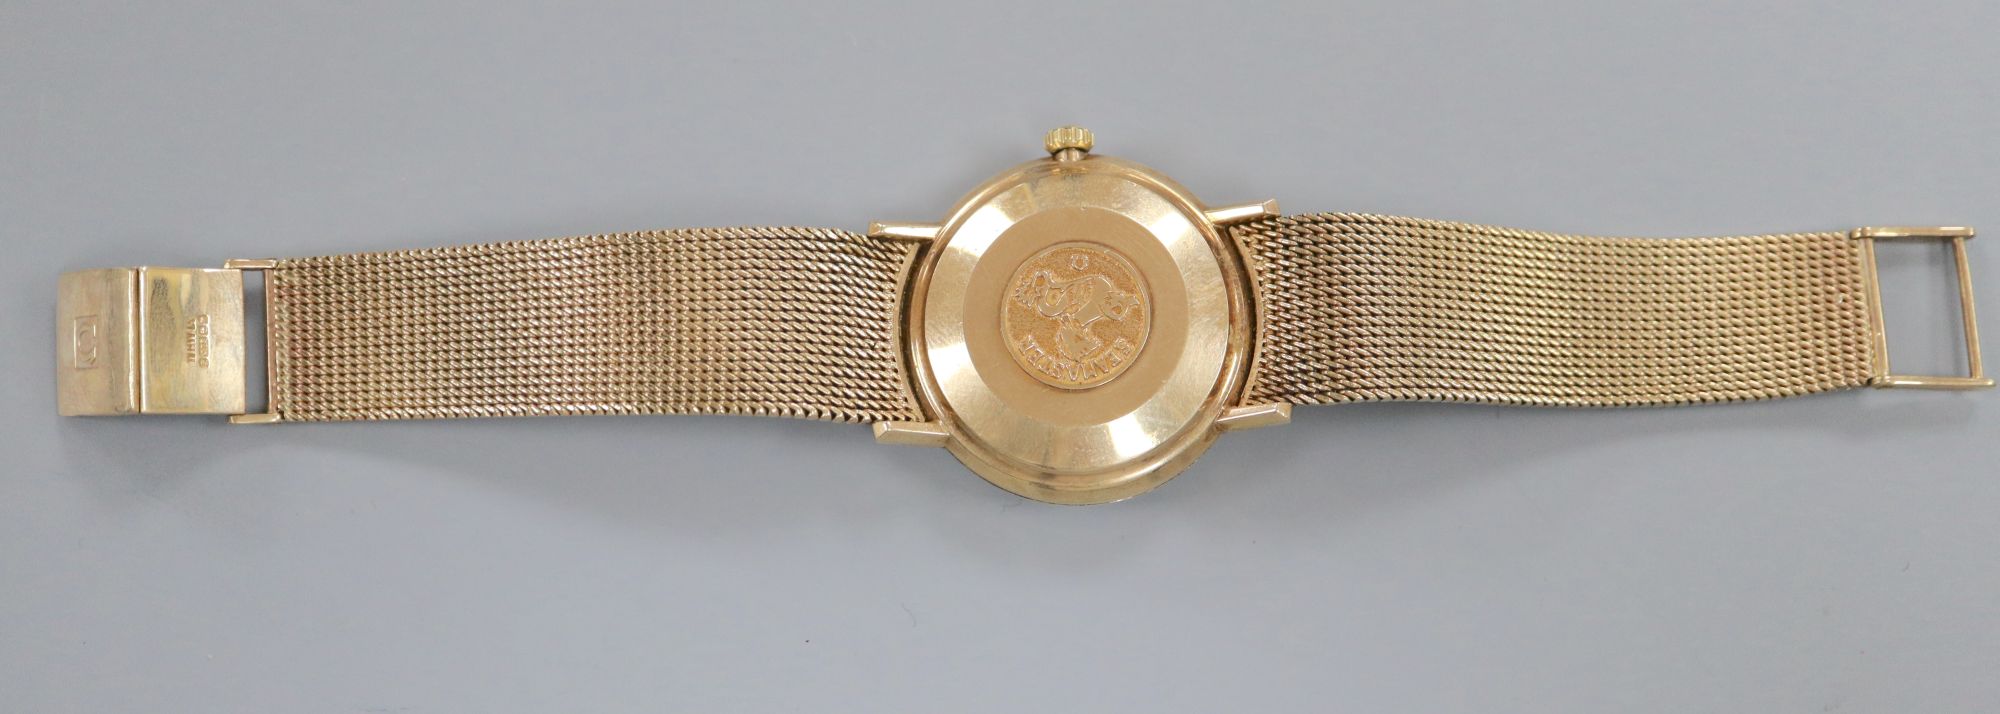 A gentlemans early 1970s 9ct gold Omega De Ville automatic wrist watch, on integral Omega 9ct gold bracelet,